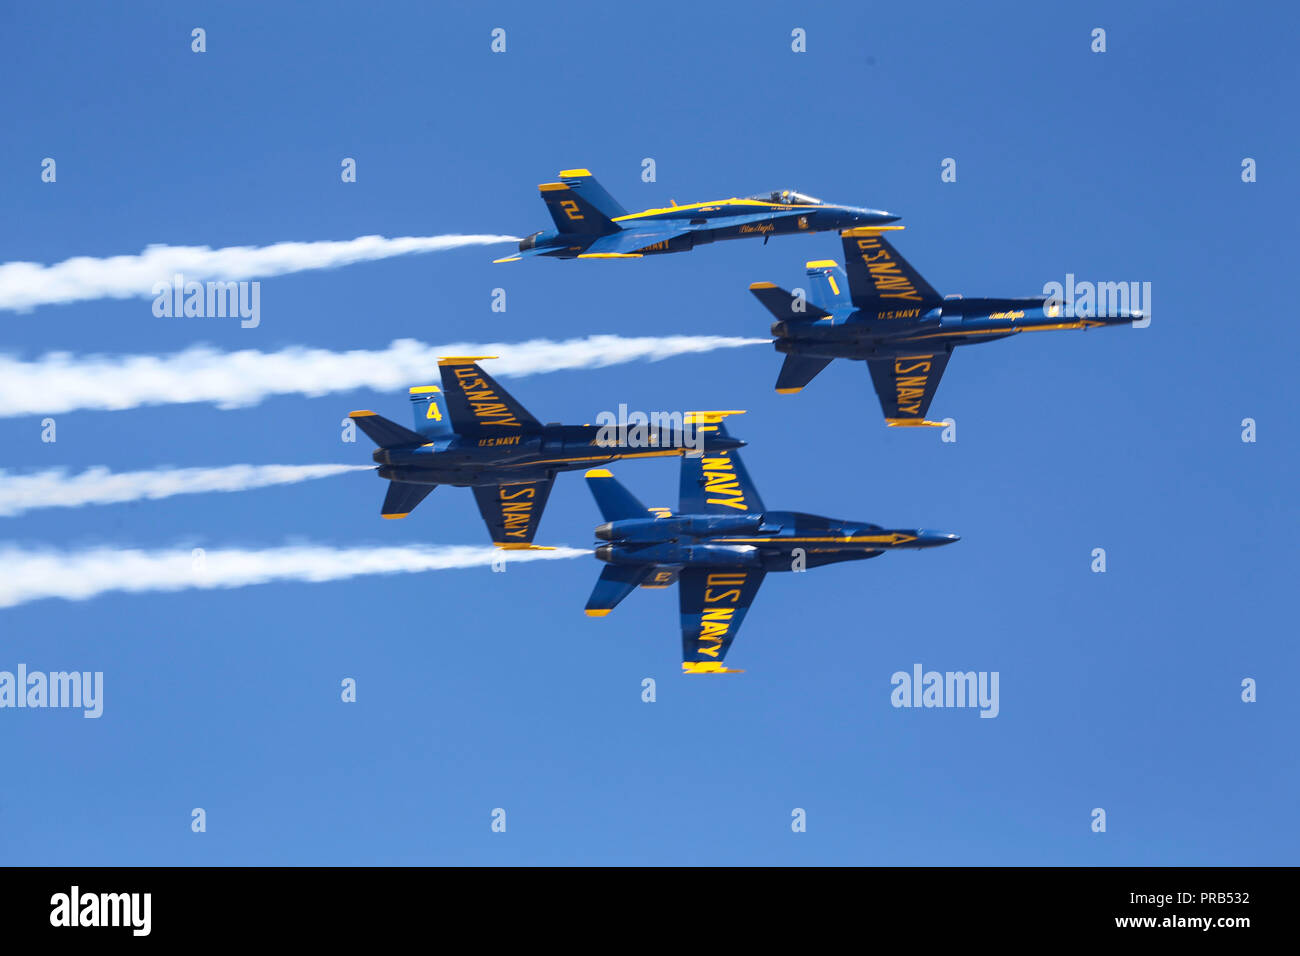 U.S. Navy Blue Angels perform dynamic aerial aerobatics during the 2018 Marine Corps Air Station Miramar Air Show on MCAS Miramar, Calif., Sept. 29. This years air show honors '100 years of women in the Marine Corps' by featuring several performance and displays that highlight accomplishments and milestones women made since the first female enlistee, Opha May Johnson, who joined the service in 1918. (U.S. Marine Corps photo by Raynaldo D. Ramos) Stock Photo